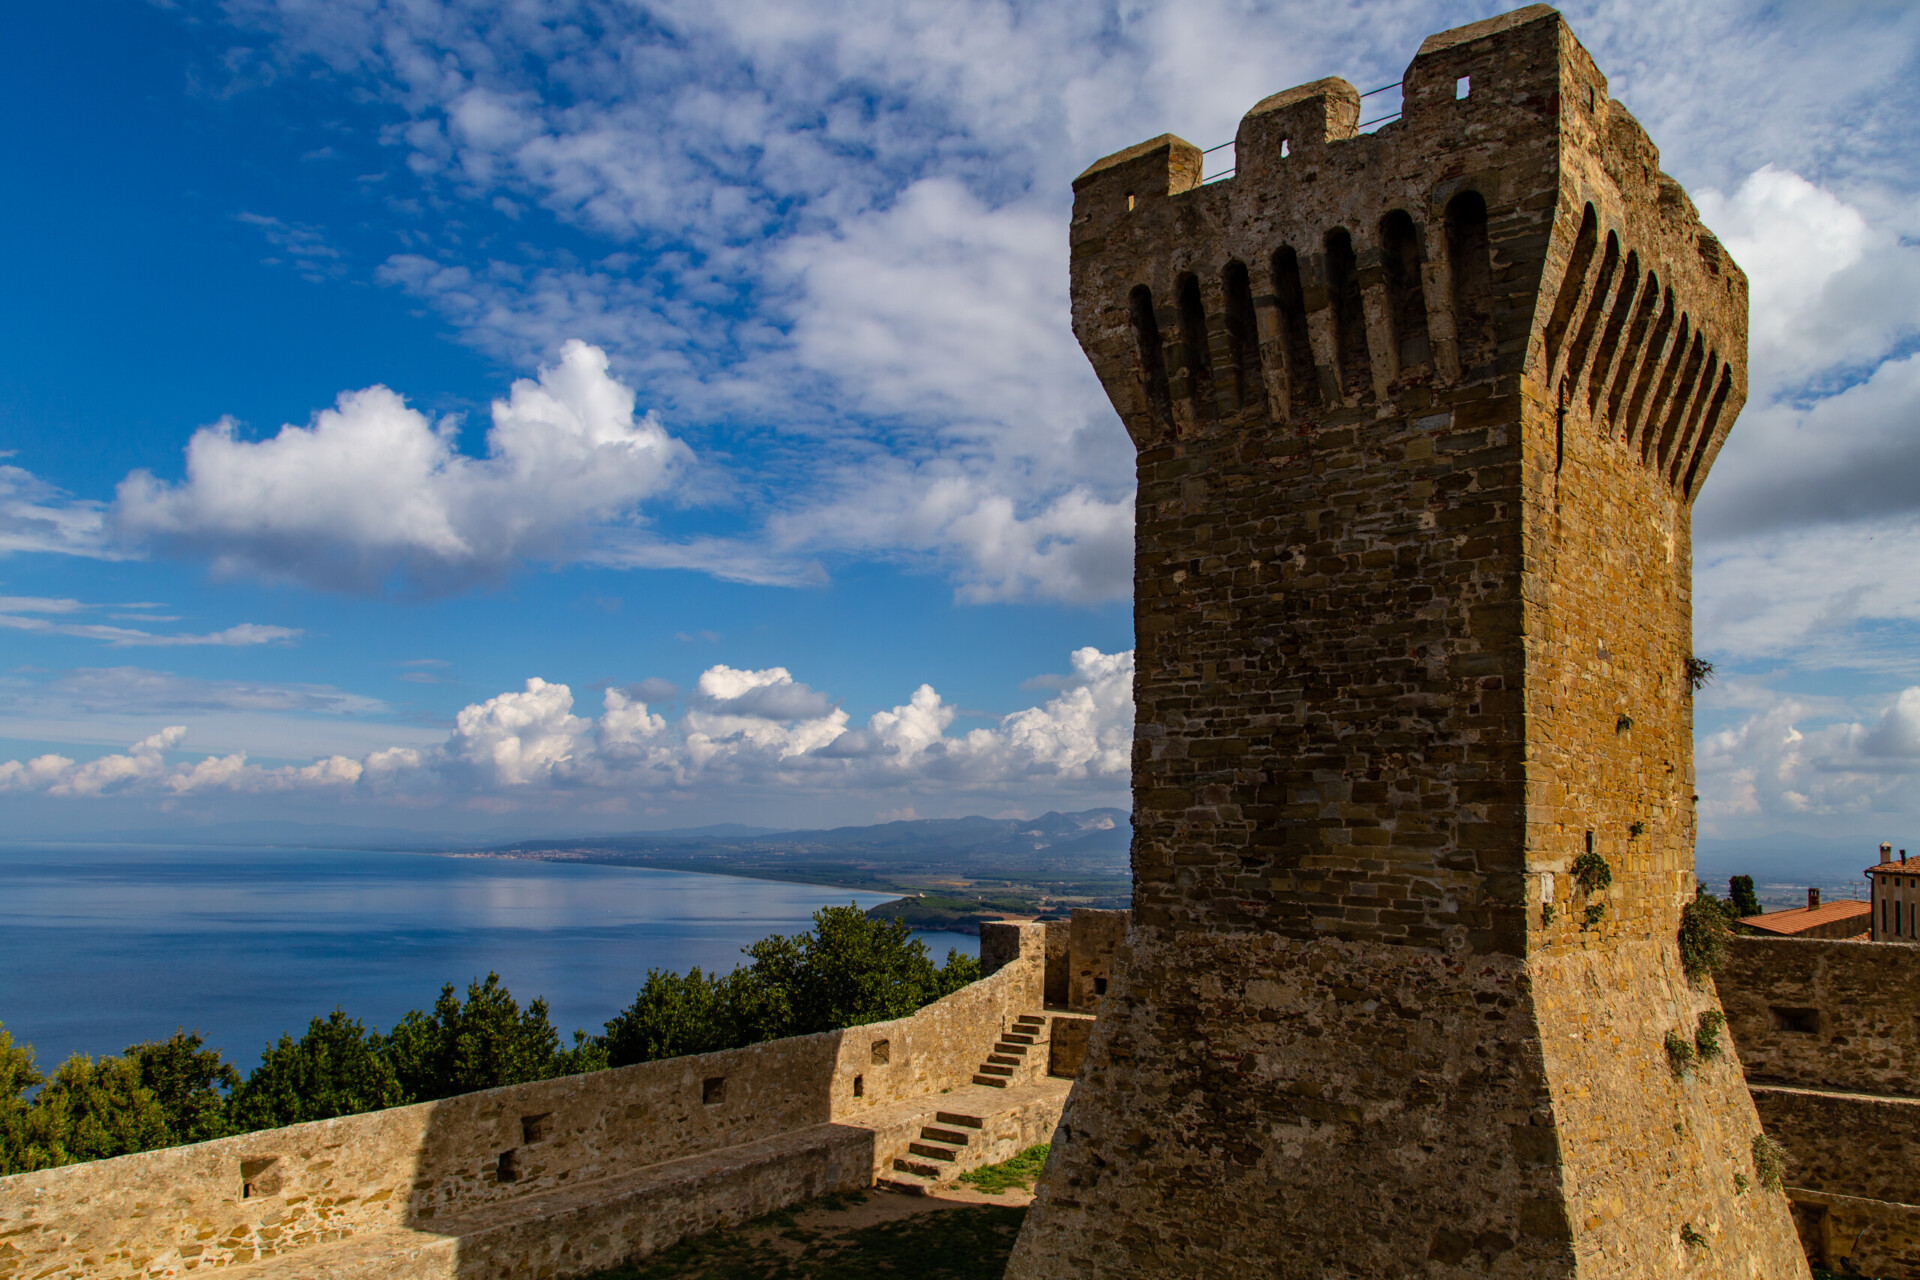 Populonia is an ancient and extremely important Etruscan city